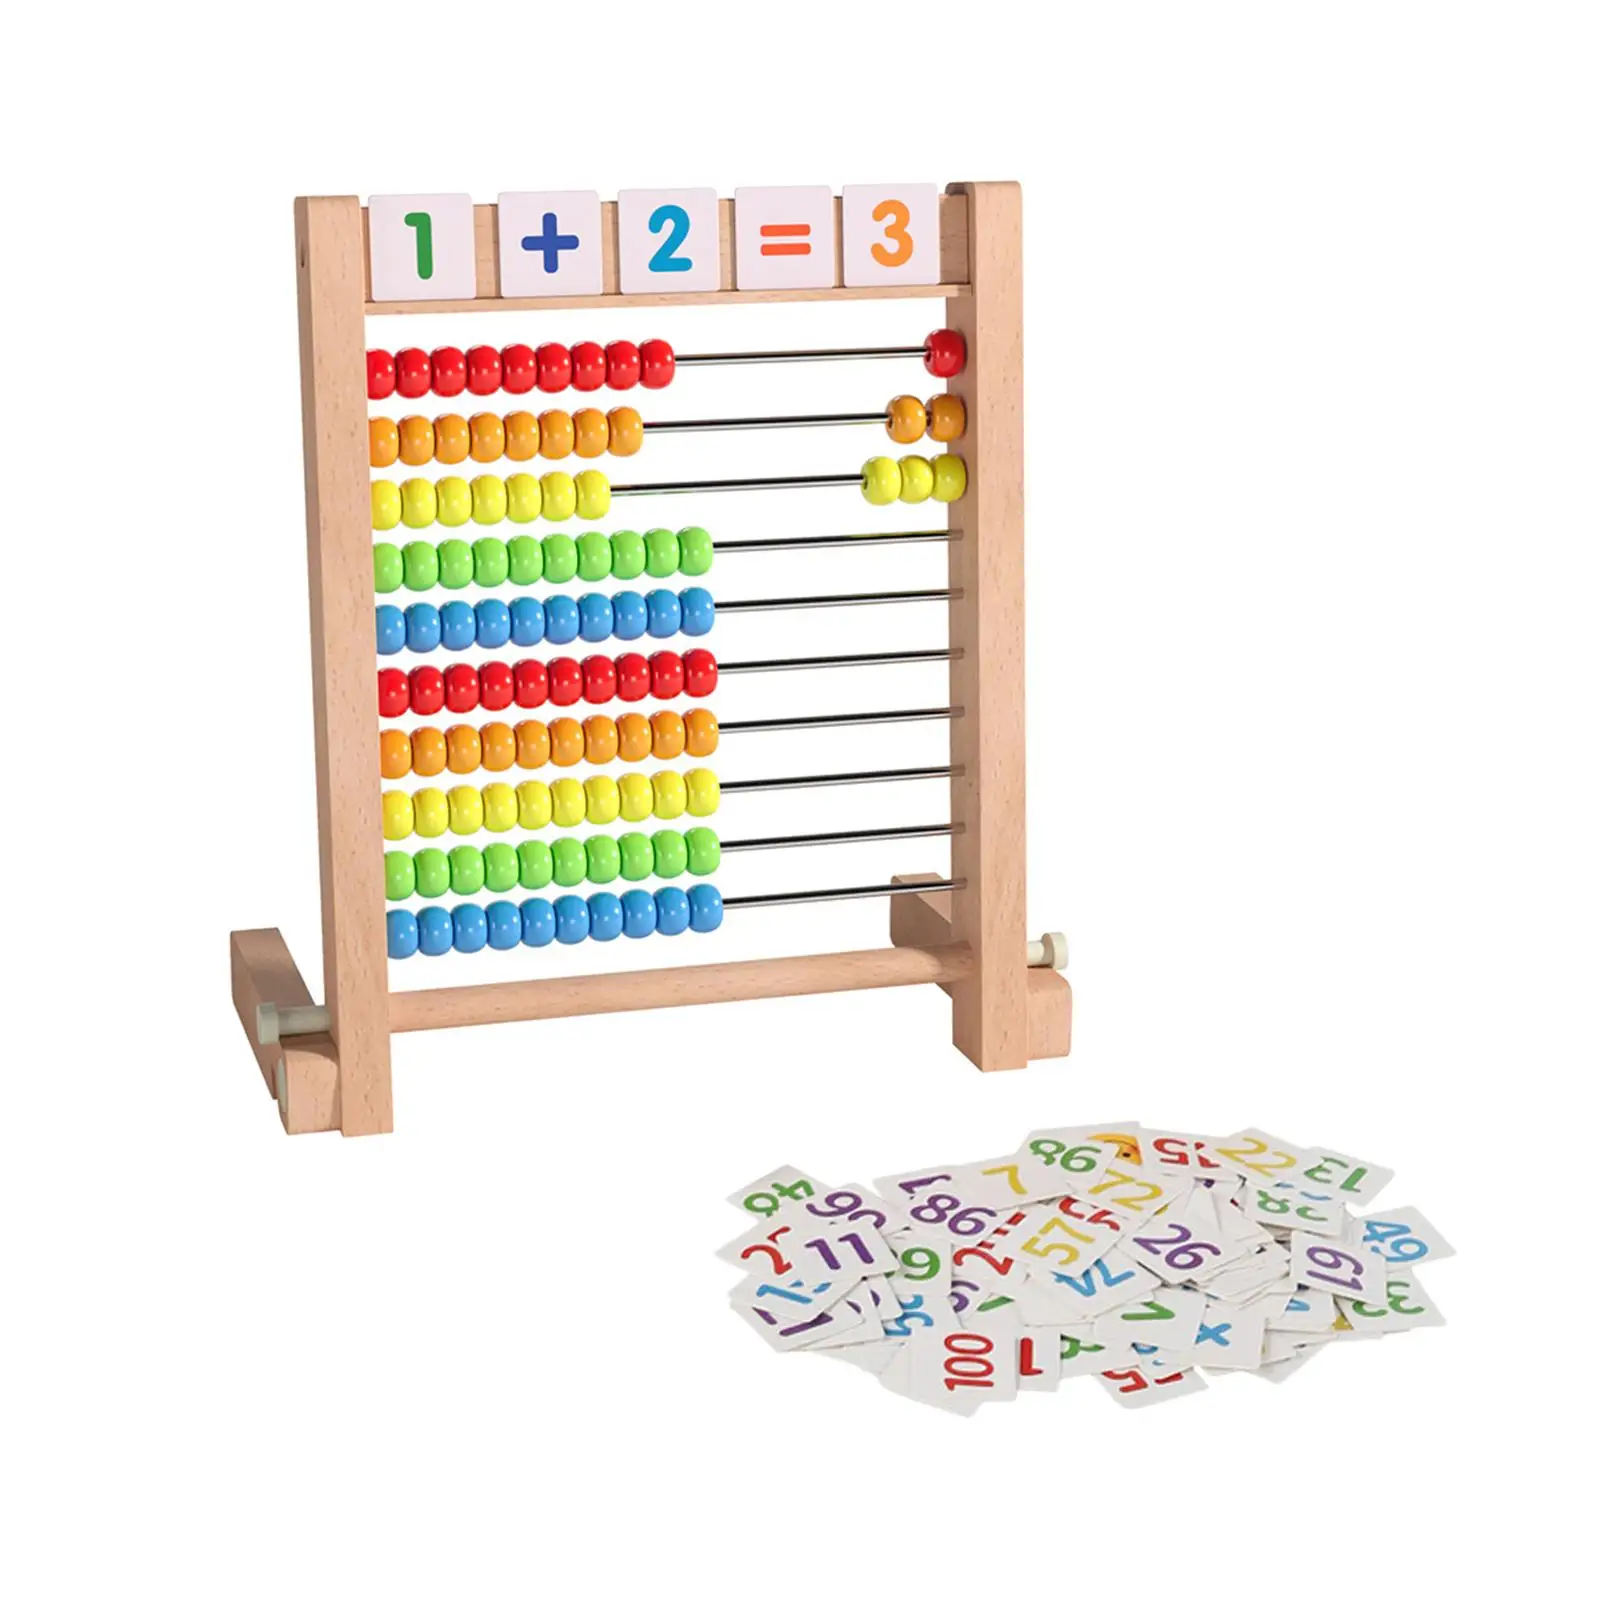 Wooden Abacus Ten Frame Set Calculating Beads Toys Educational Counting Toy for Kids Kindergarten Boys Girls Children Learning